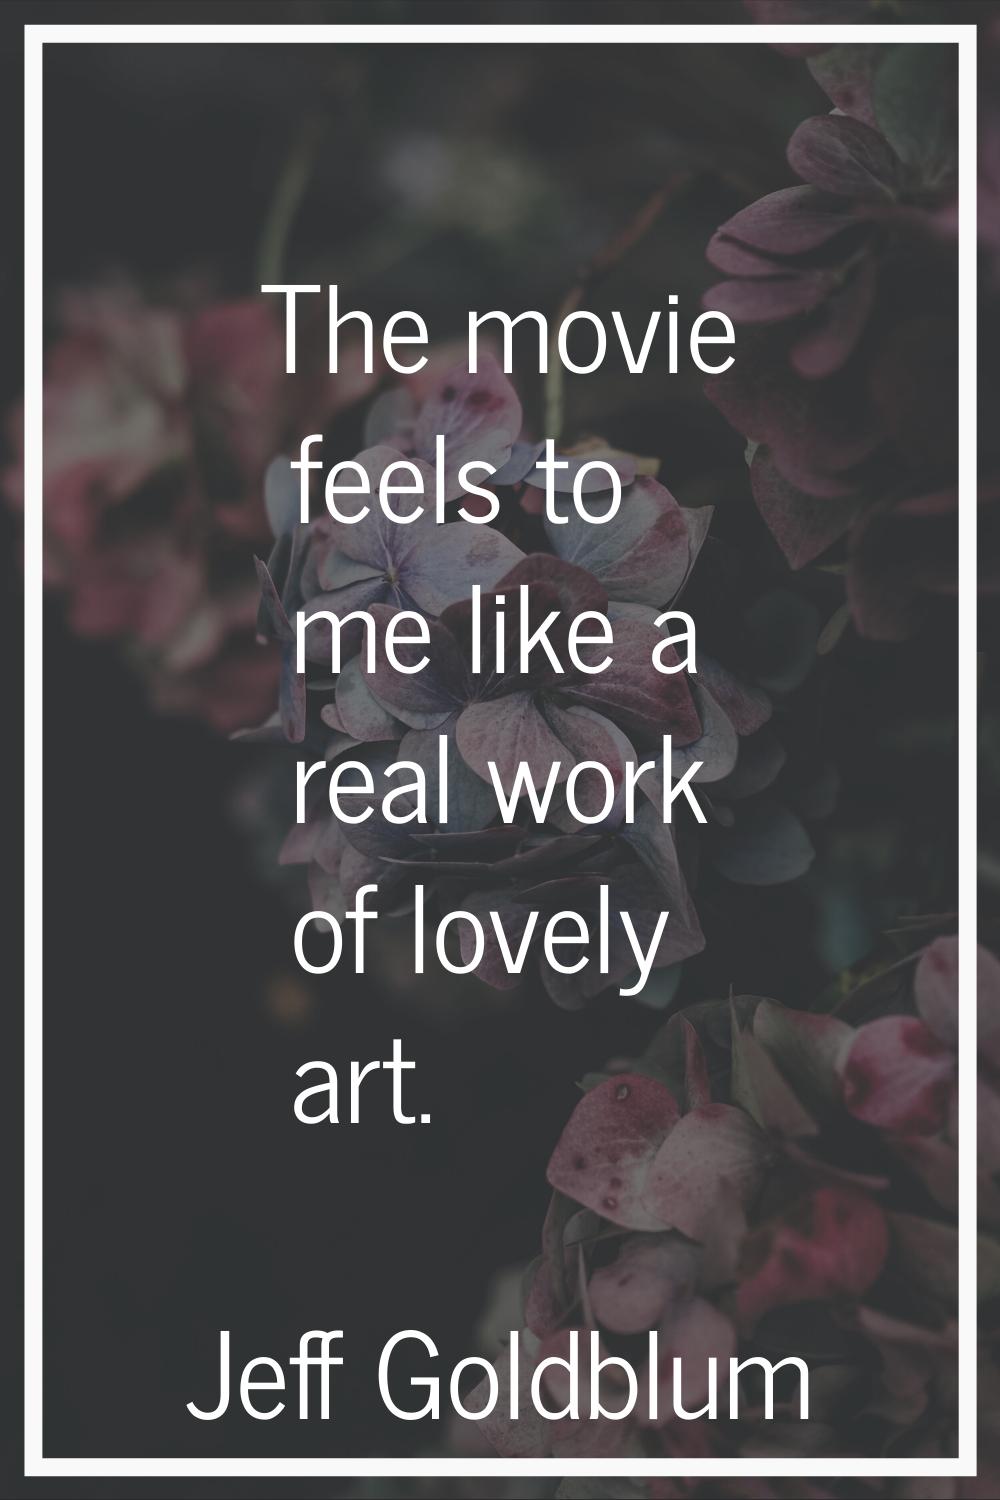 The movie feels to me like a real work of lovely art.